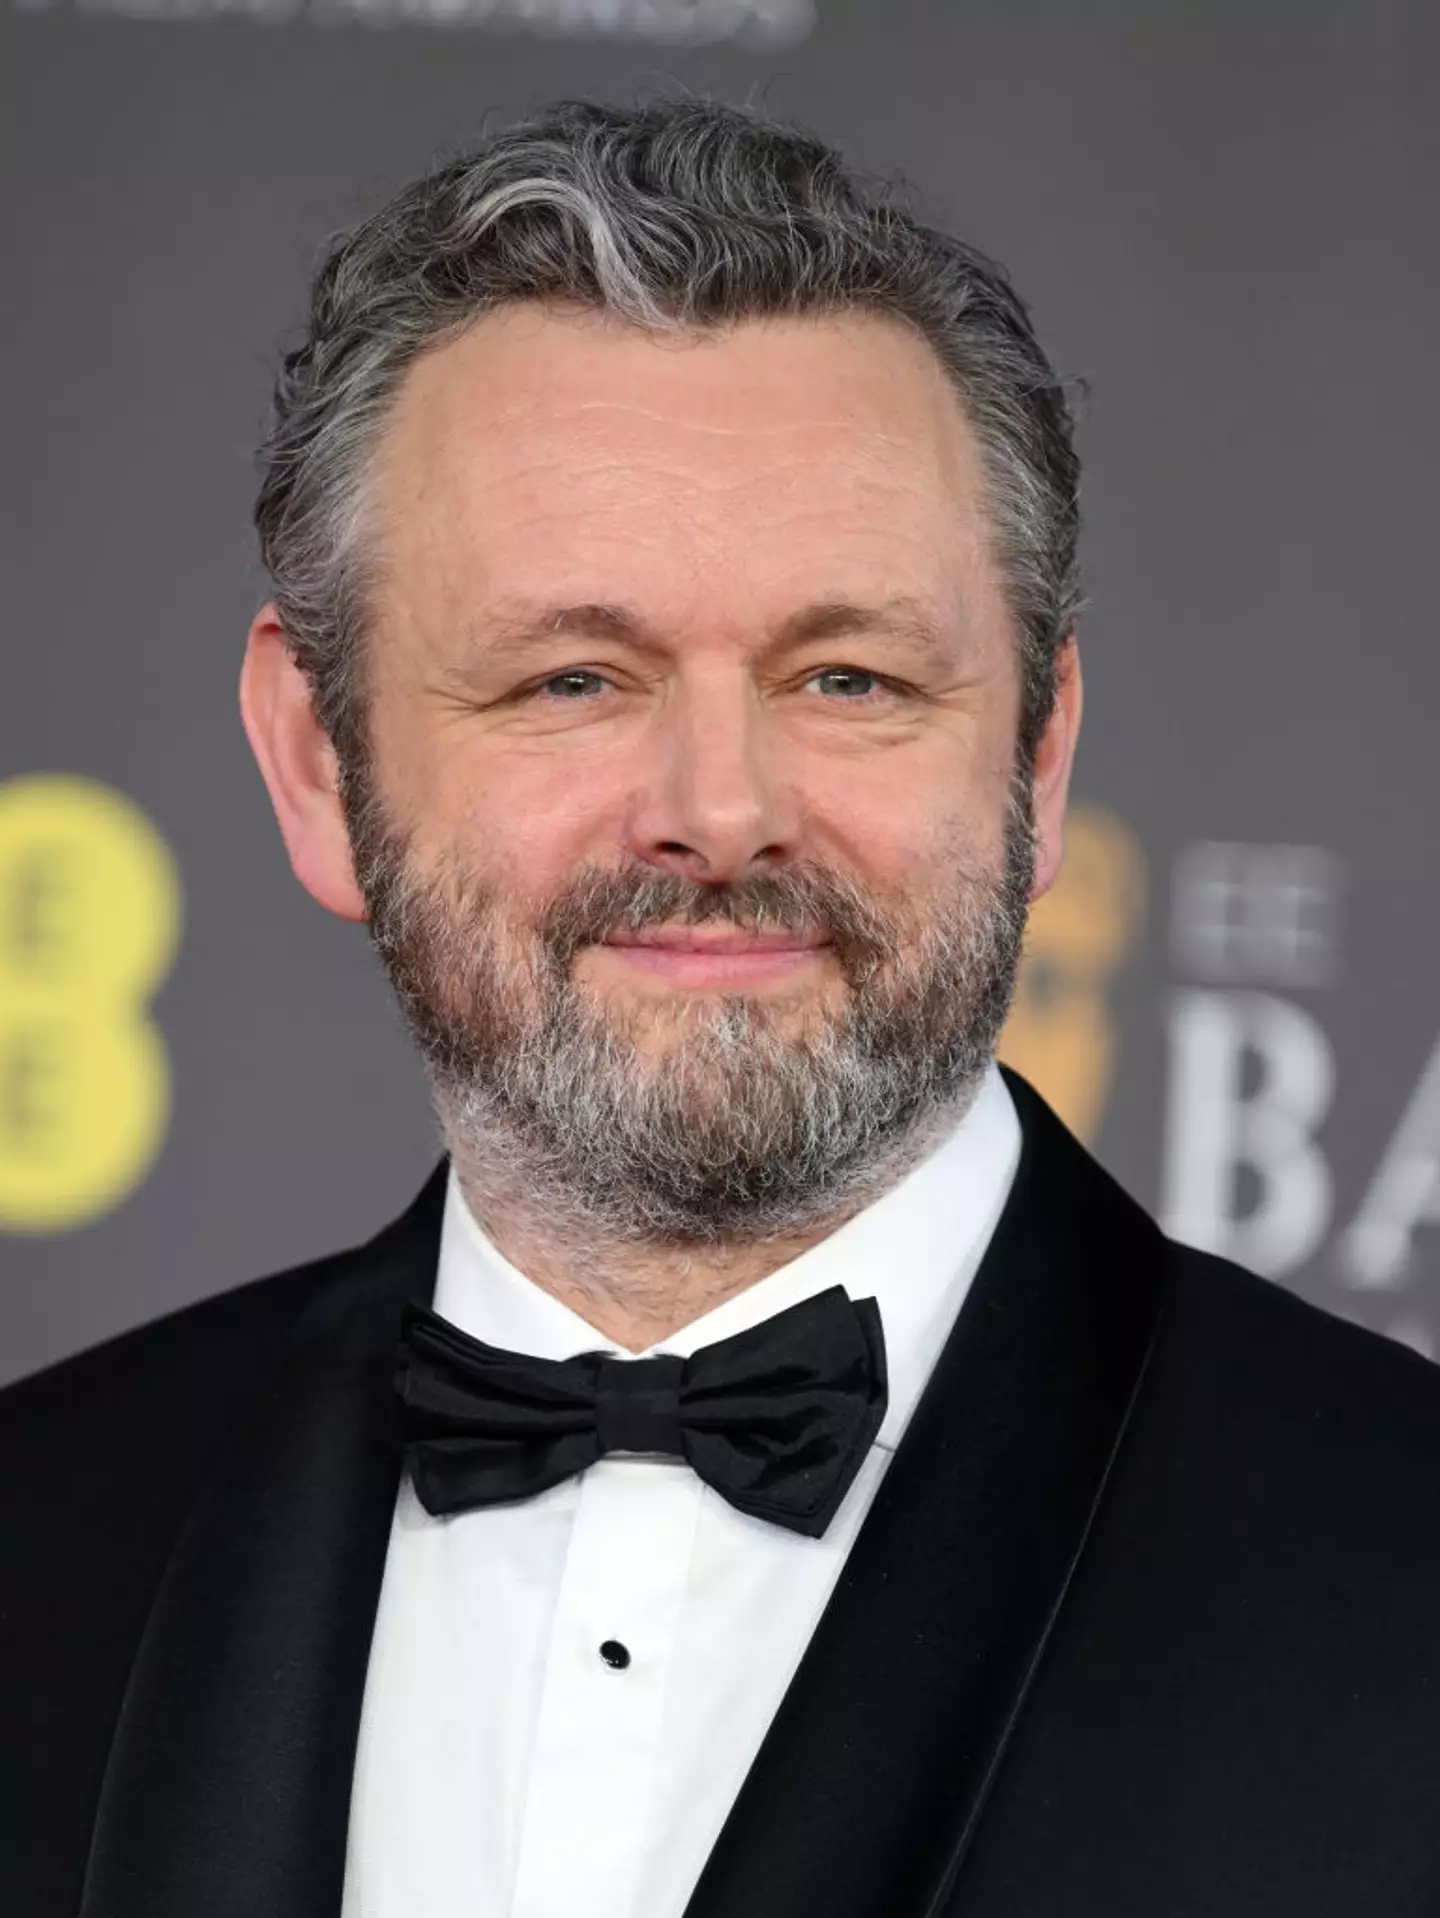 Michael Sheen has candidly opened up about the age gap he has with his girlfriend.